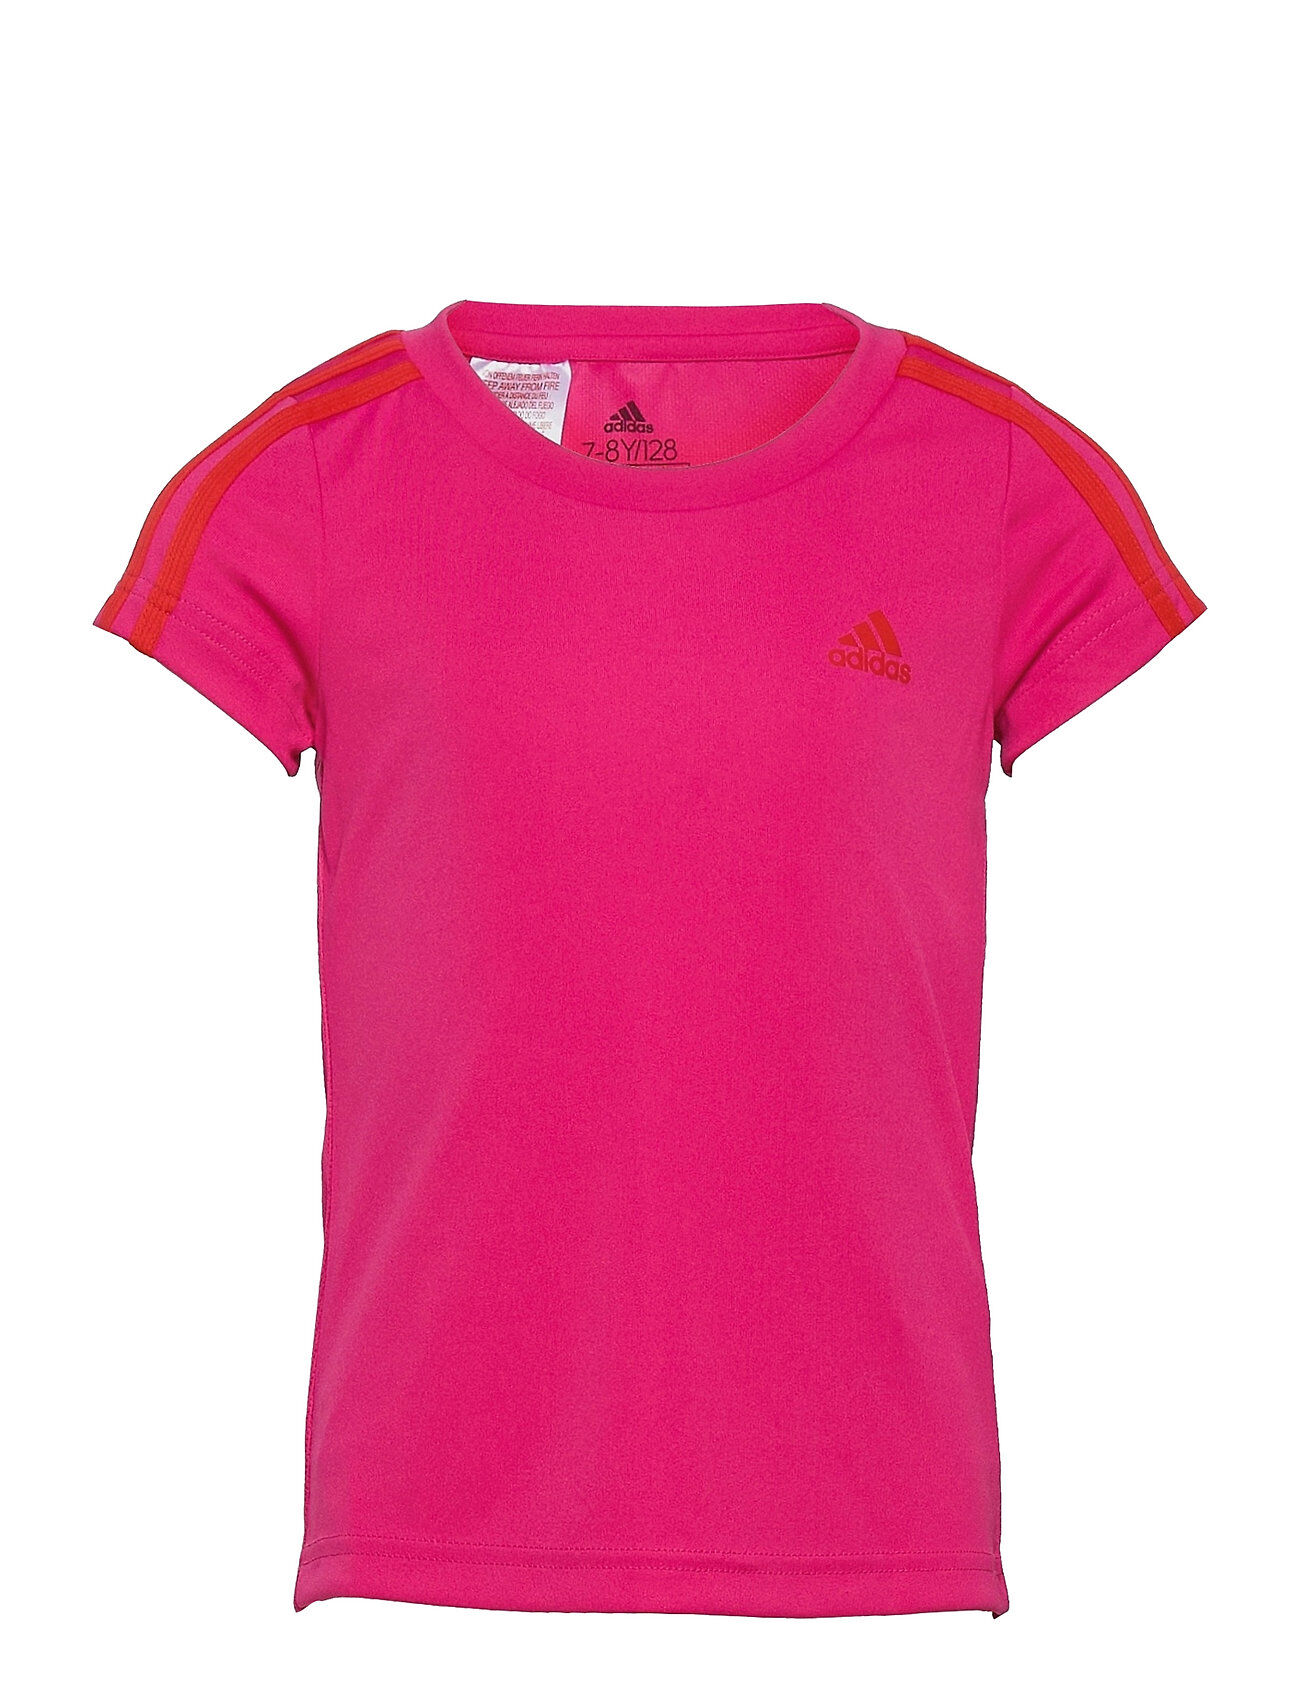 adidas Performance Designed To Move 3-Stripes Tee W T-shirts Short-sleeved Rosa Adidas Performance